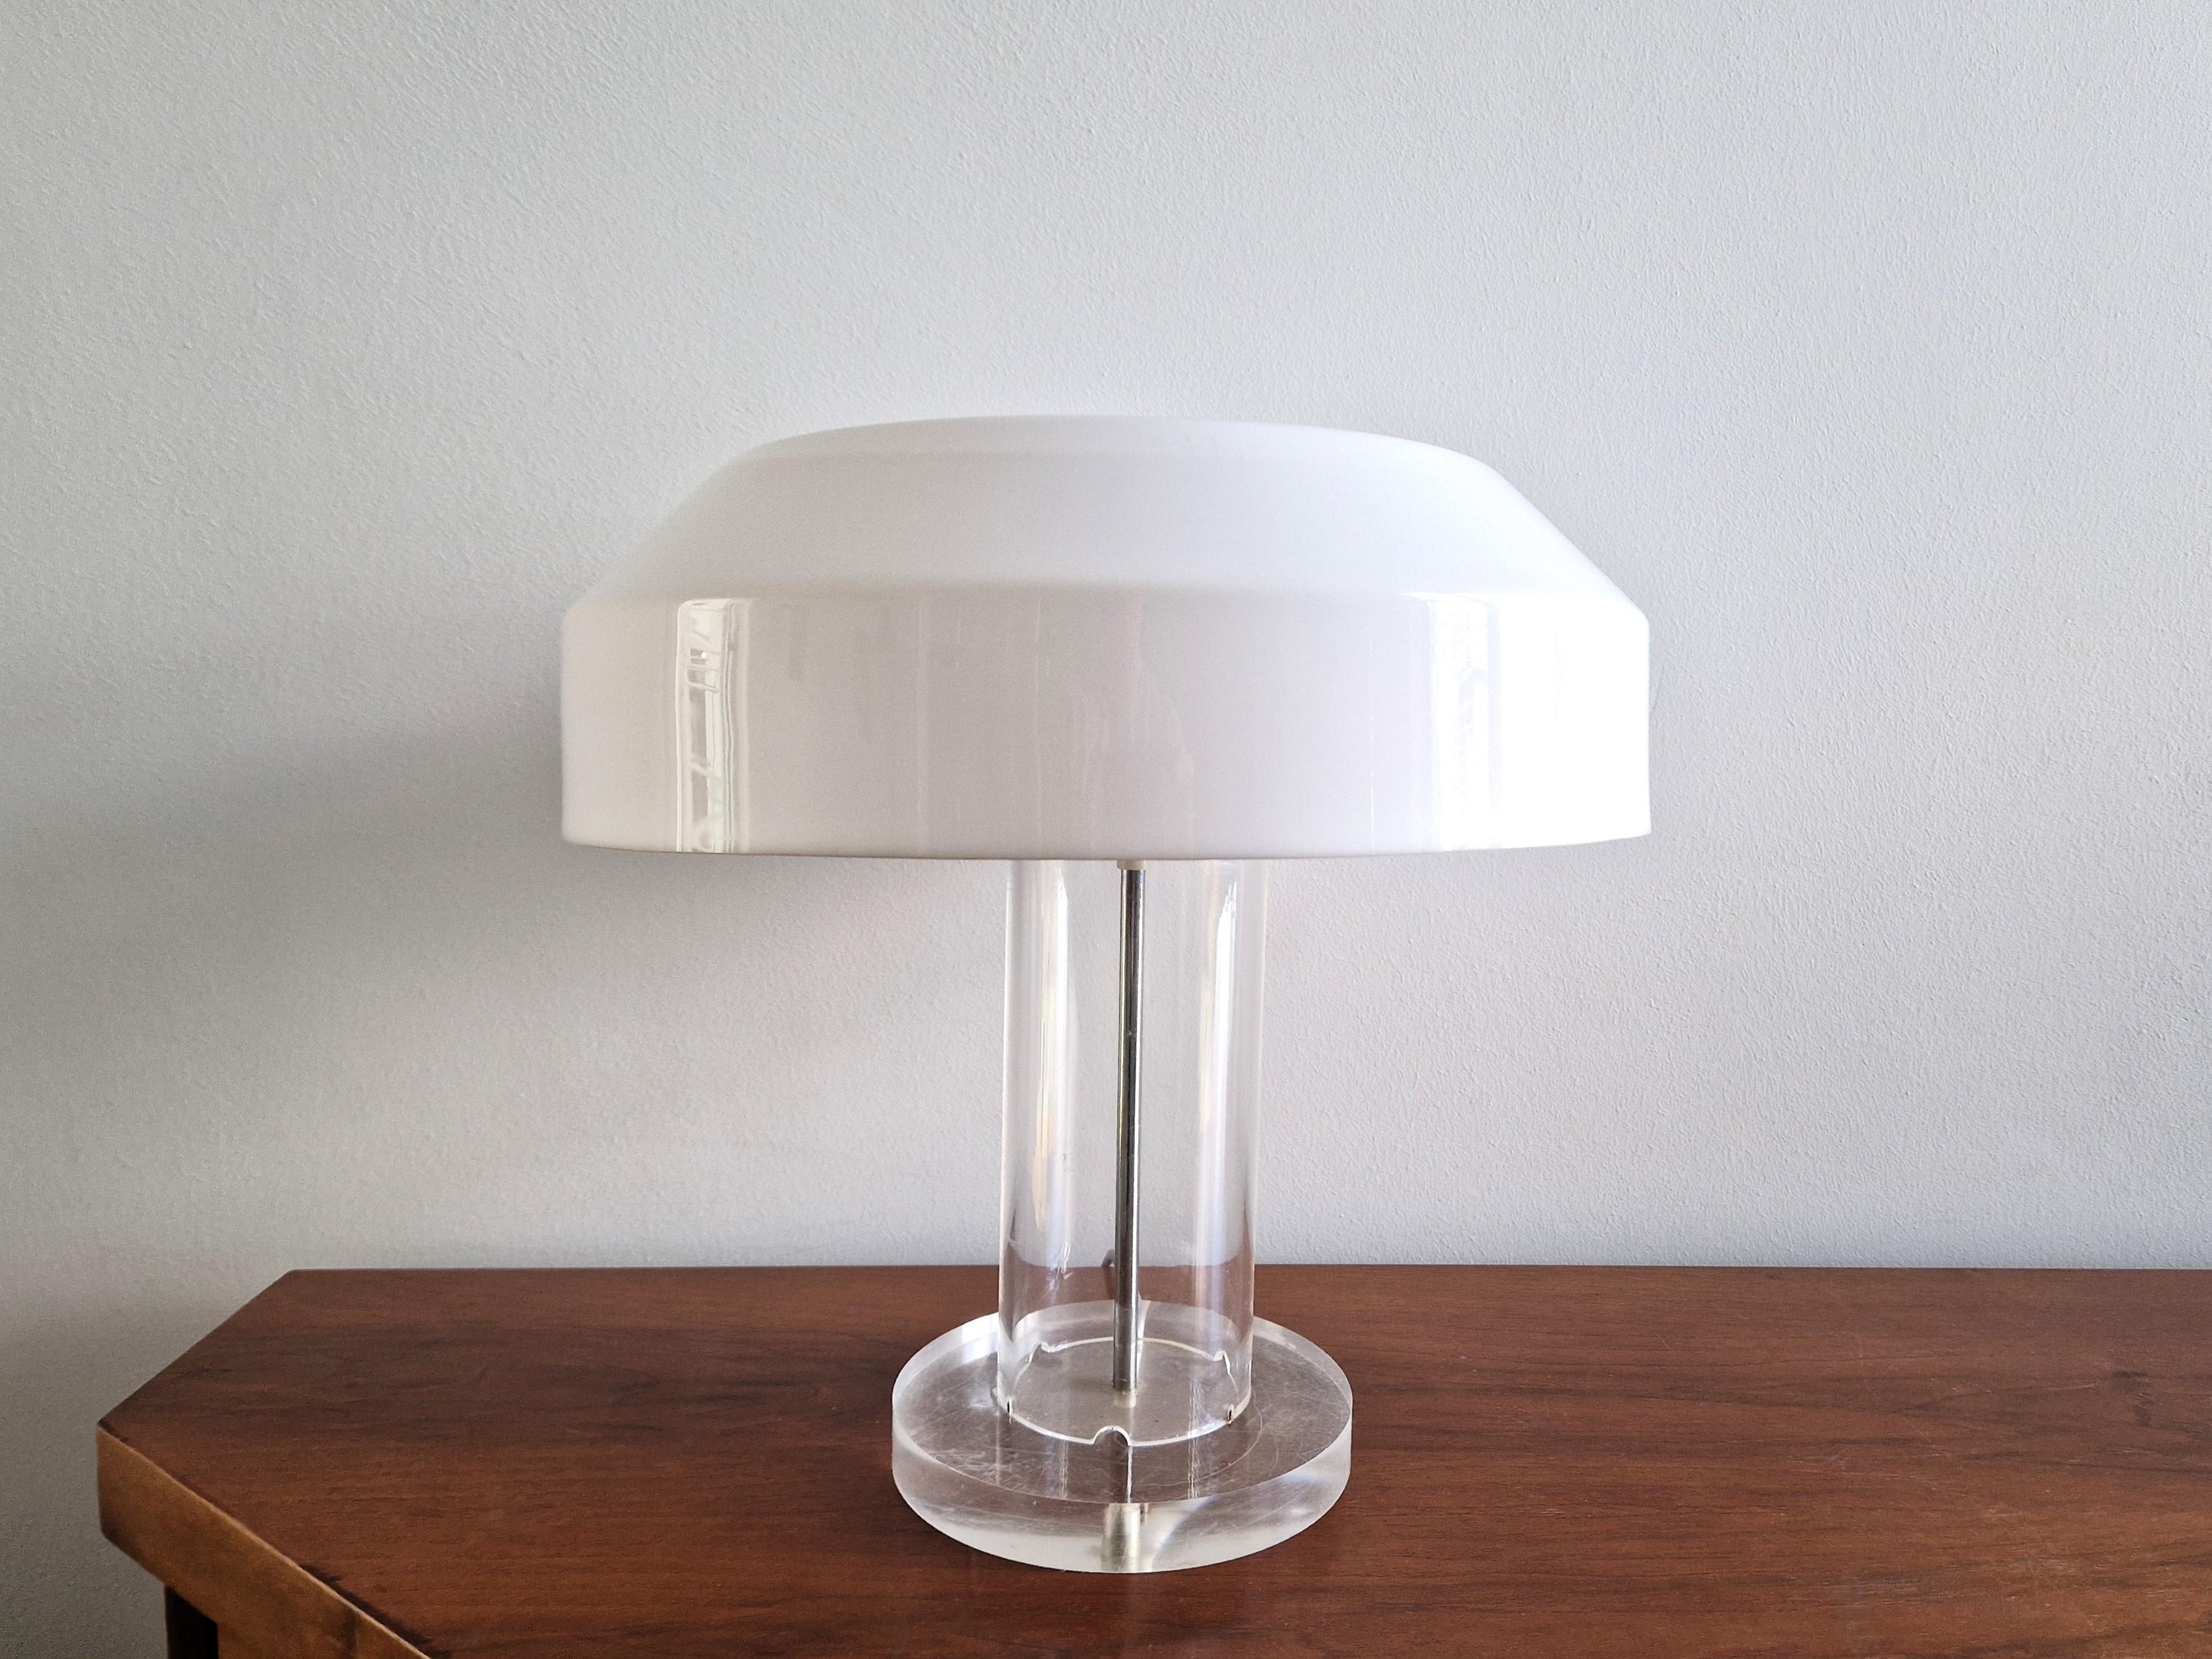 The 'ABN' lamp was commissioned for the ABN AMRO bank around 1975 and produced in a limited edition by Aldo van den Nieuwelaar's own company. The lamp has a white plastic shade that rests directly on a transparent plexiglass base. The light pictured